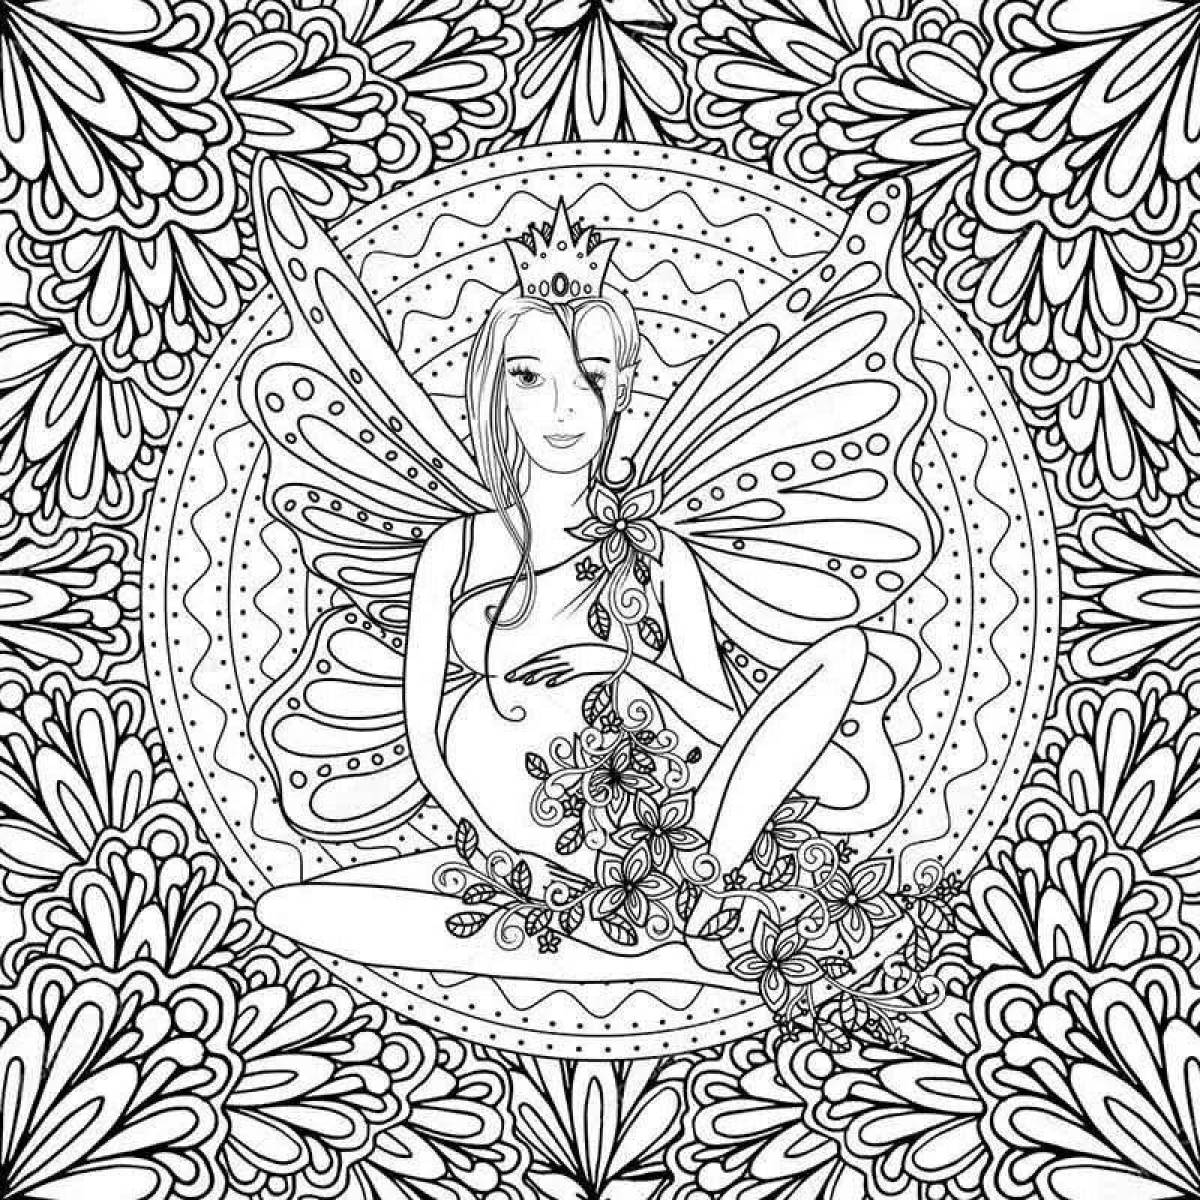 Inspirational anti-stress coloring book for pregnant women